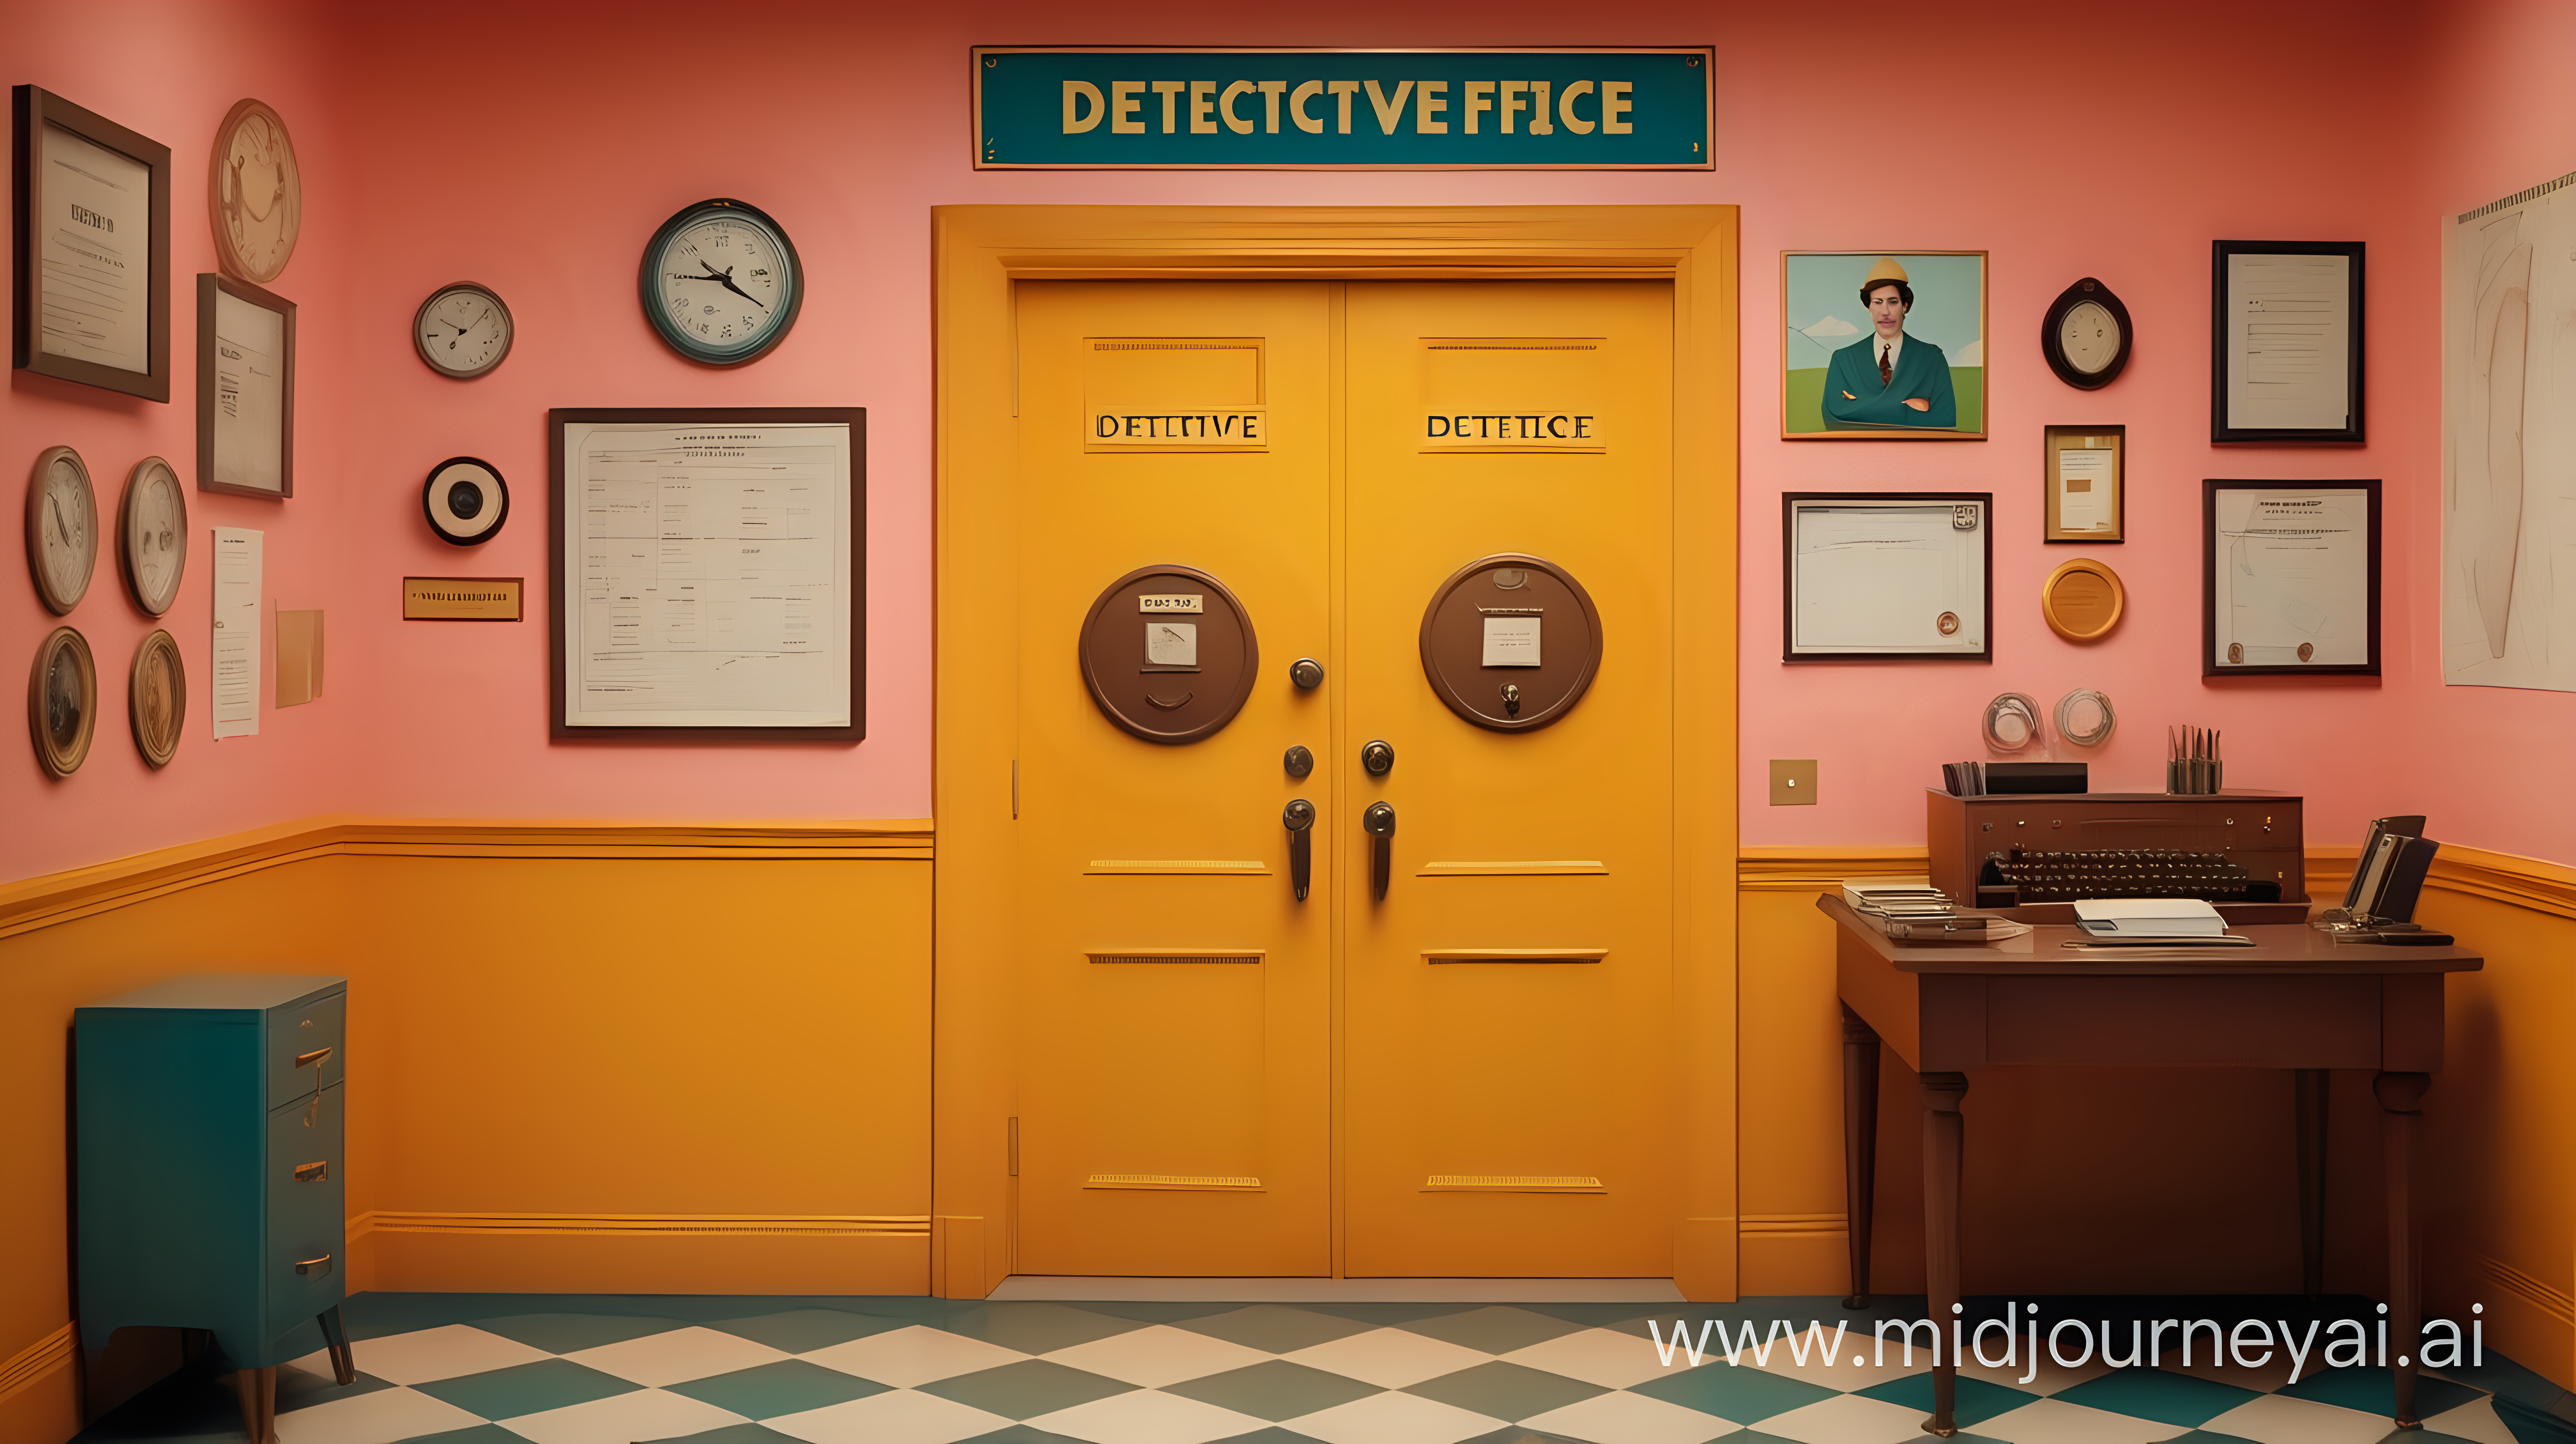 Detective office door in the style of wes anderson